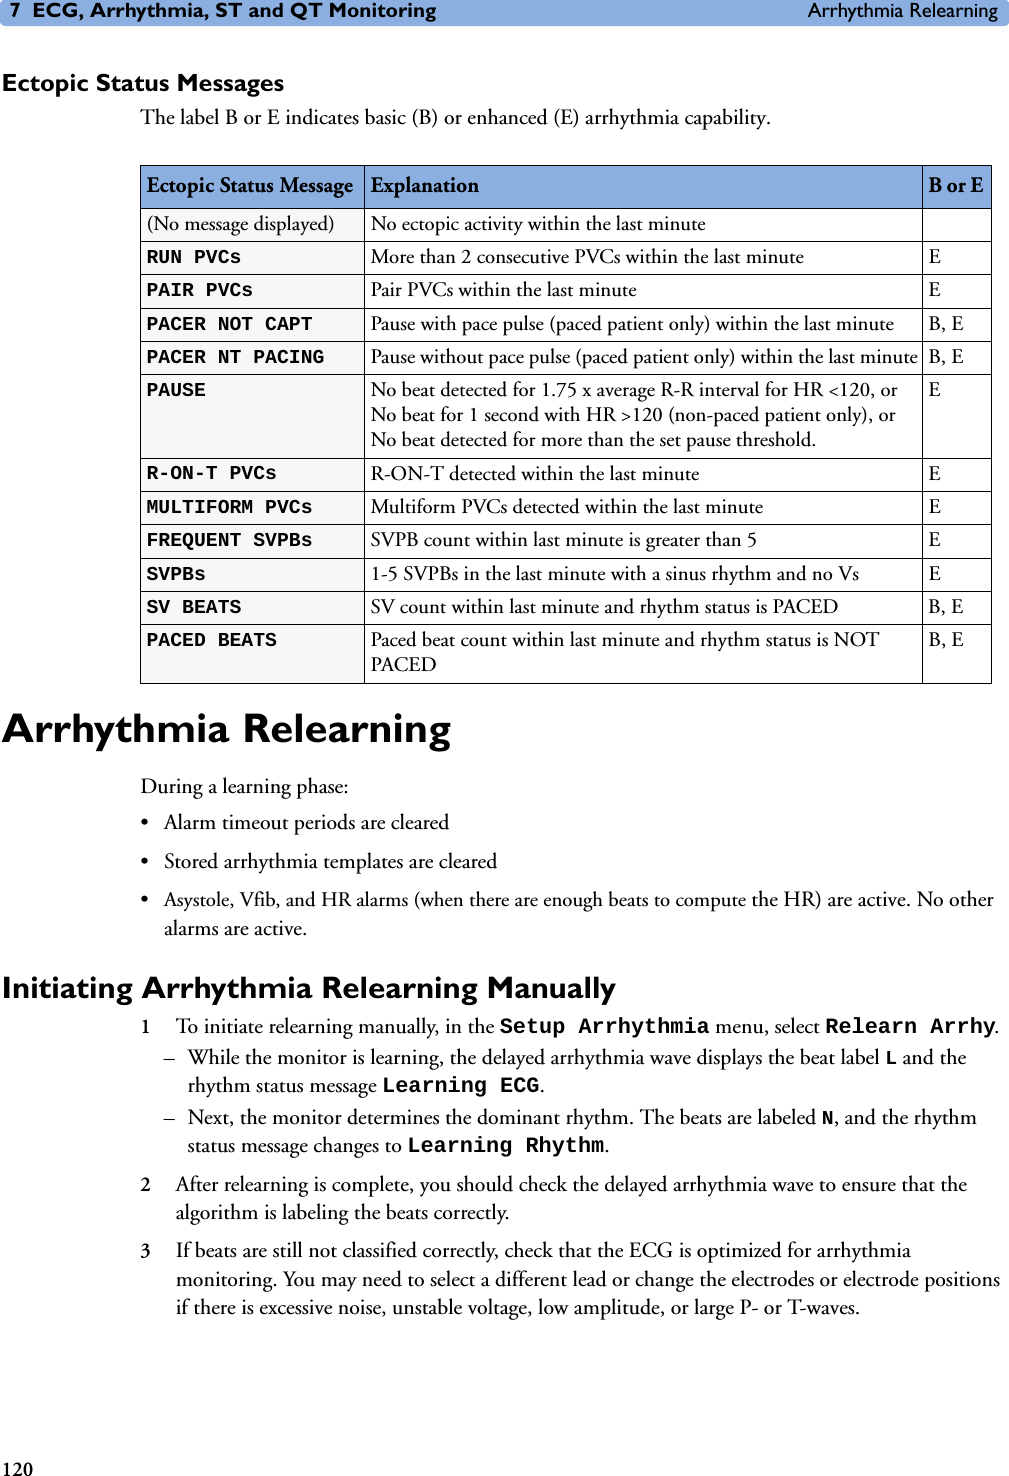 7 ECG, Arrhythmia, ST and QT Monitoring Arrhythmia Relearning120Ectopic Status MessagesThe label B or E indicates basic (B) or enhanced (E) arrhythmia capability.Arrhythmia RelearningDuring a learning phase:• Alarm timeout periods are cleared• Stored arrhythmia templates are cleared•Asystole, Vfib, and HR alarms (when there are enough beats to compute the HR) are active. No other alarms are active.Initiating Arrhythmia Relearning Manually1To initiate relearning manually, in the Setup Arrhythmia menu, select Relearn Arrhy.– While the monitor is learning, the delayed arrhythmia wave displays the beat label L and the rhythm status message Learning ECG. – Next, the monitor determines the dominant rhythm. The beats are labeled N, and the rhythm status message changes to Learning Rhythm.2After relearning is complete, you should check the delayed arrhythmia wave to ensure that the algorithm is labeling the beats correctly. 3If beats are still not classified correctly, check that the ECG is optimized for arrhythmia monitoring. You may need to select a different lead or change the electrodes or electrode positions if there is excessive noise, unstable voltage, low amplitude, or large P- or T-waves. Ectopic Status Message Explanation B or E (No message displayed) No ectopic activity within the last minuteRUN PVCs  More than 2 consecutive PVCs within the last minute EPAIR PVCs  Pair PVCs within the last minute EPACER NOT CAPT  Pause with pace pulse (paced patient only) within the last minute B, EPACER NT PACING  Pause without pace pulse (paced patient only) within the last minute B, EPAUSE  No beat detected for 1.75 x average R-R interval for HR &lt;120, or No beat for 1 second with HR &gt;120 (non-paced patient only), or No beat detected for more than the set pause threshold.ER-ON-T PVCs R-ON-T detected within the last minute EMULTIFORM PVCs  Multiform PVCs detected within the last minute EFREQUENT SVPBs  SVPB count within last minute is greater than 5 ESVPBs  1-5 SVPBs in the last minute with a sinus rhythm and no Vs ESV BEATS  SV count within last minute and rhythm status is PACED B, EPACED BEATS  Paced beat count within last minute and rhythm status is NOT PACEDB, E